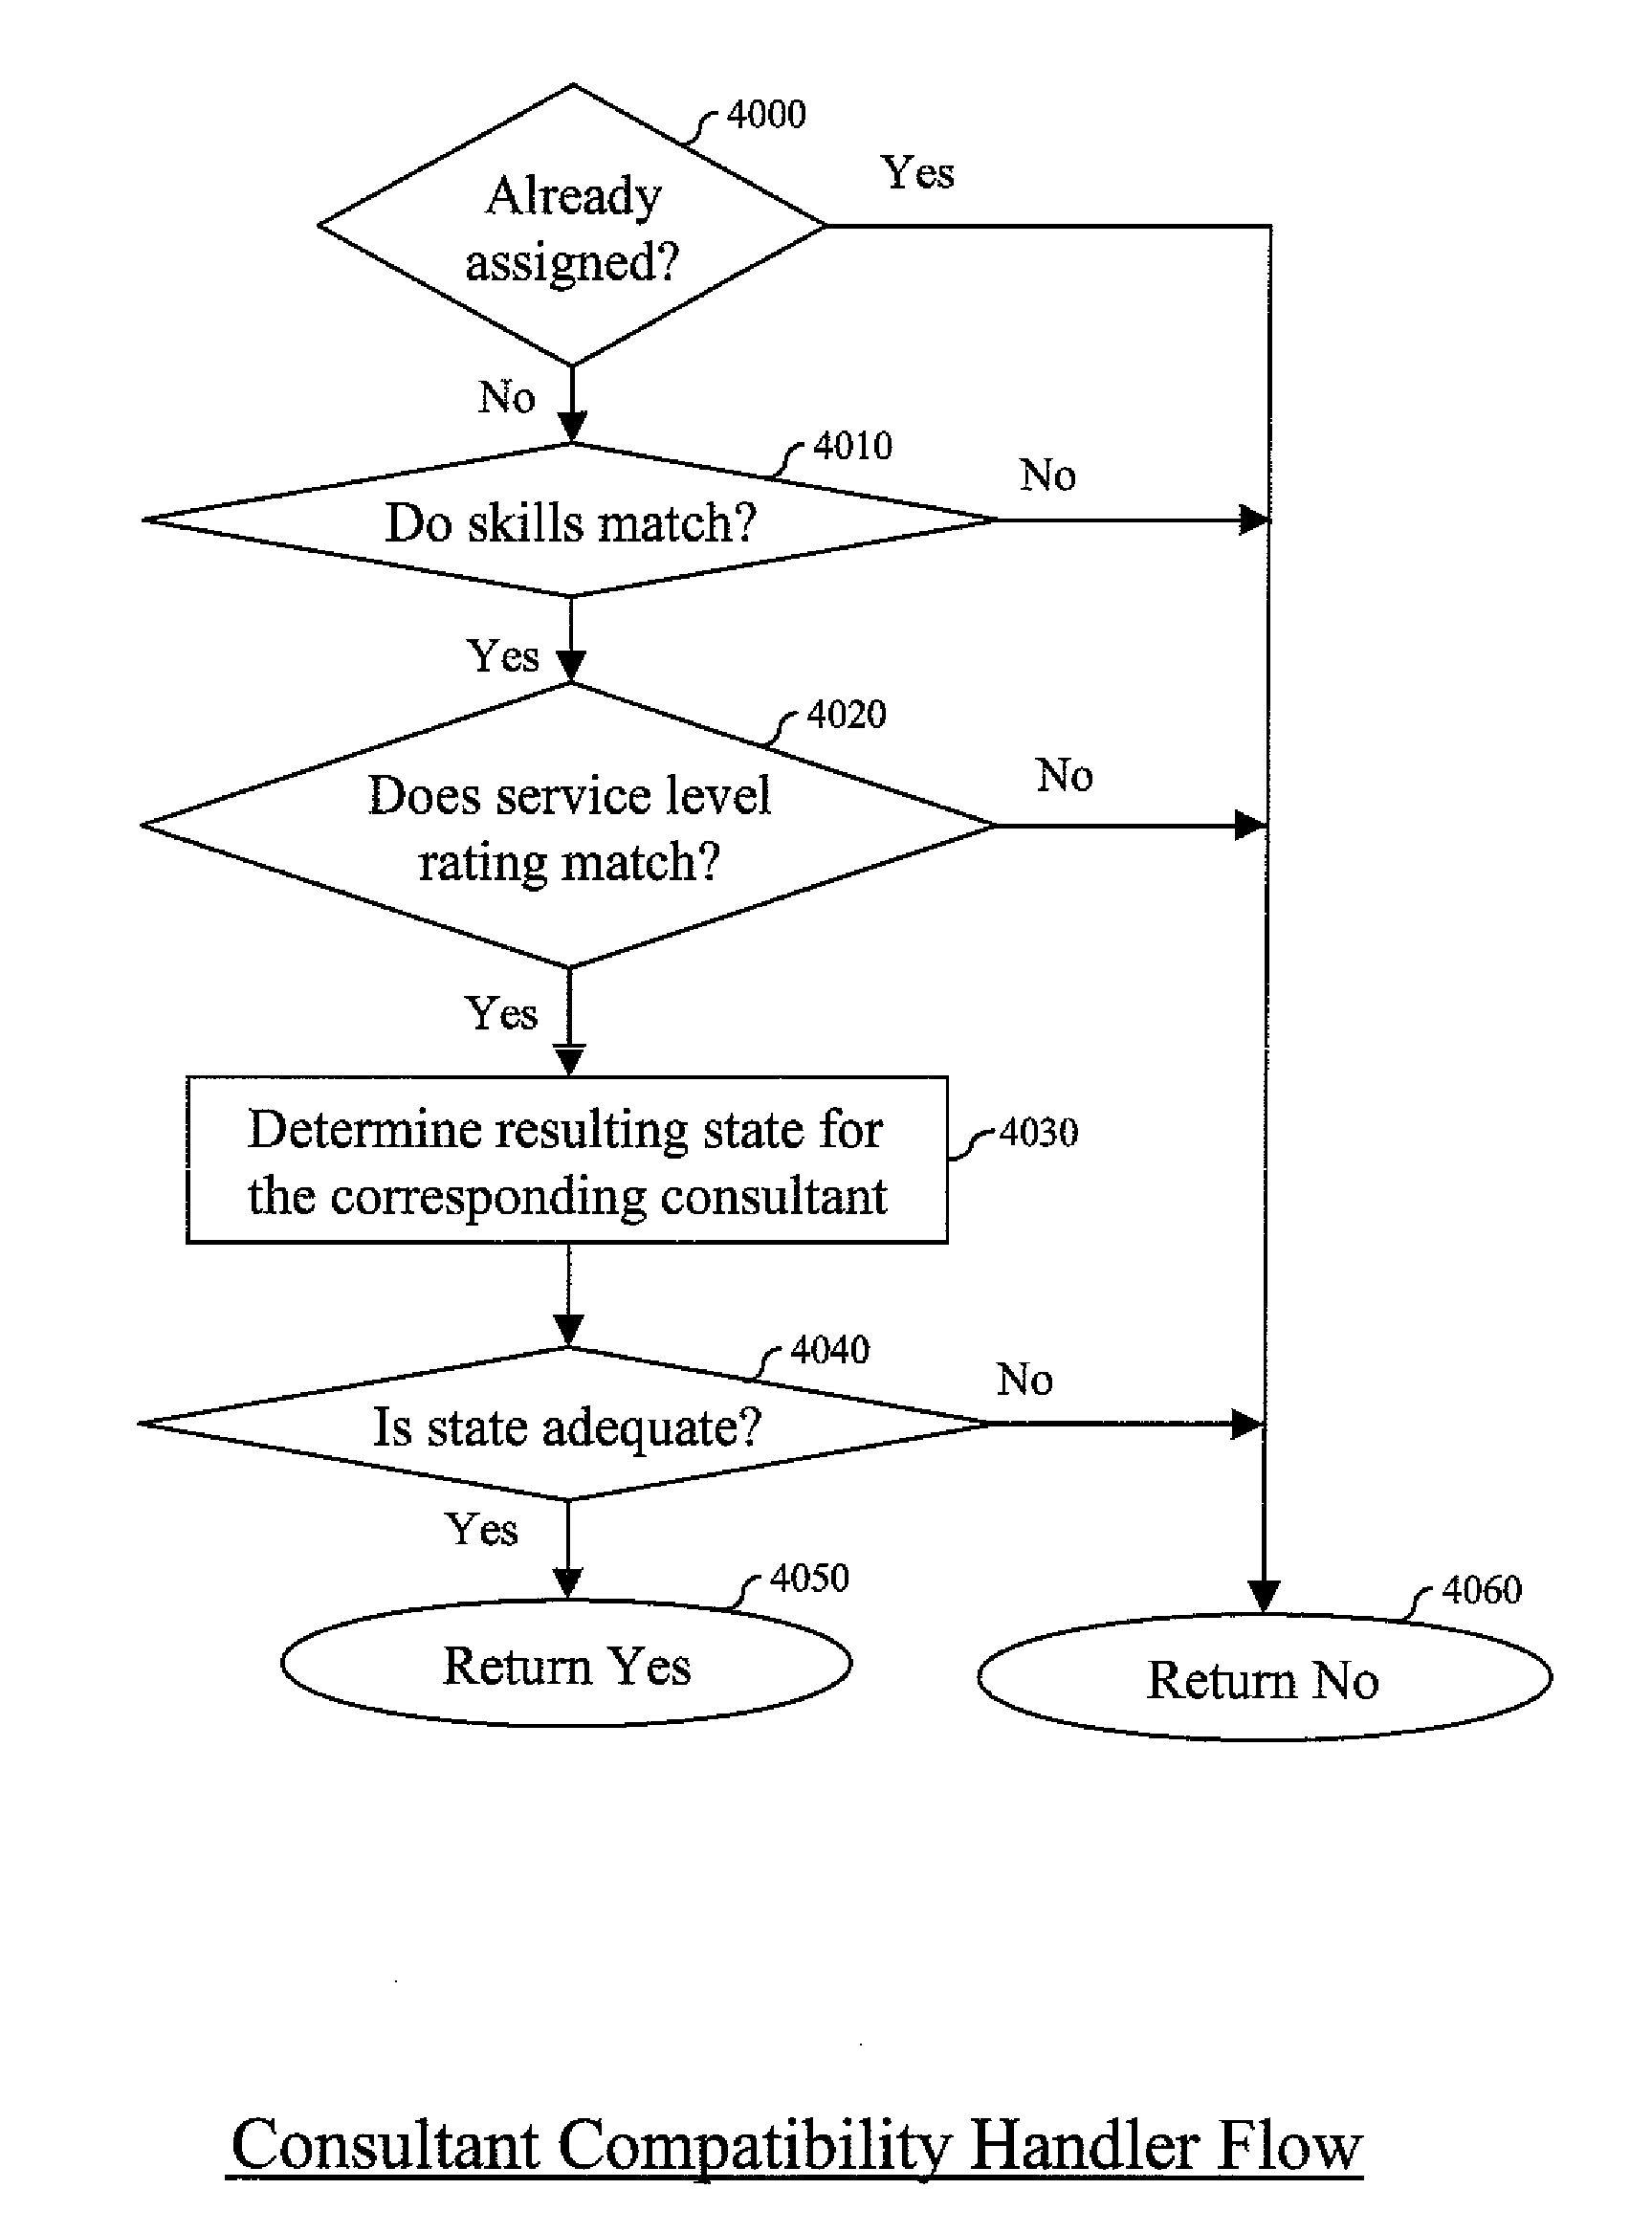 Method and system for routing a task to an employee based on physical and emotional state